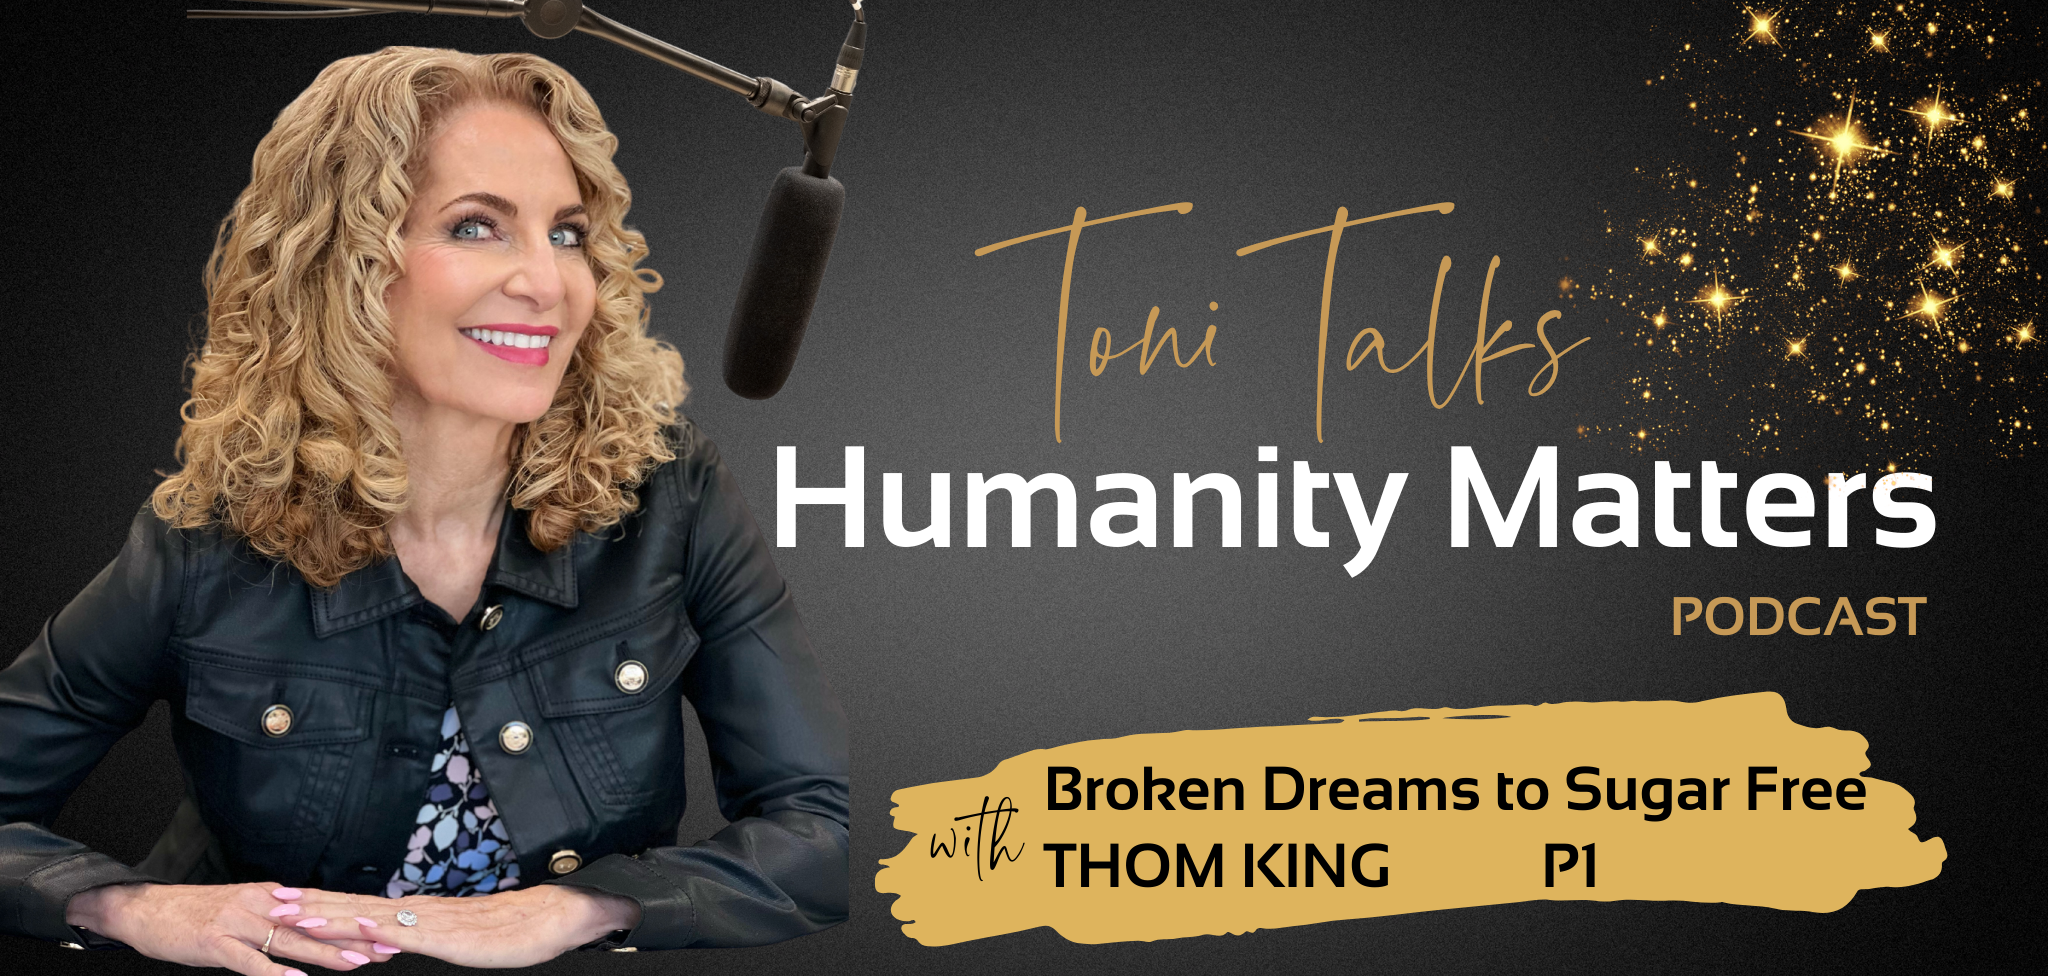 From Broken Dreams to Sugar Free with Thom King Part 1